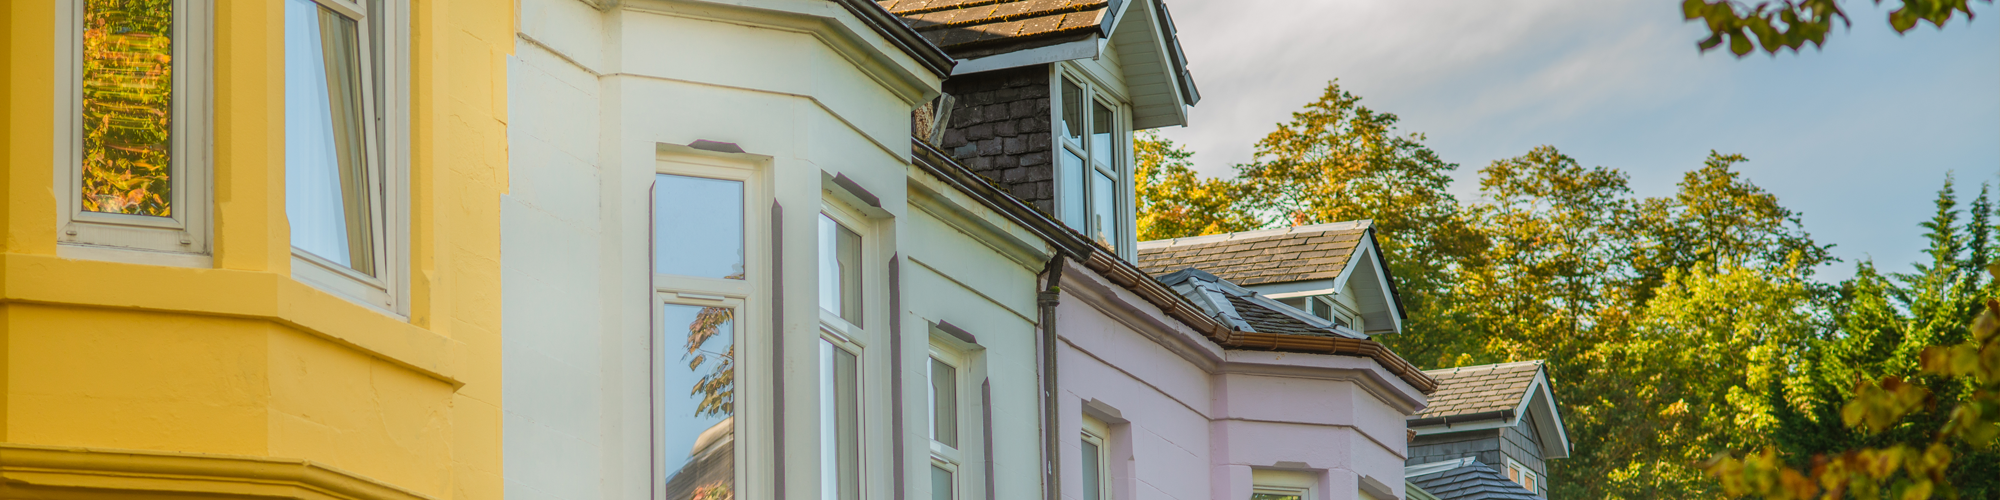 Online Conveyancing Versus High Street comparing the two types of conveyancing